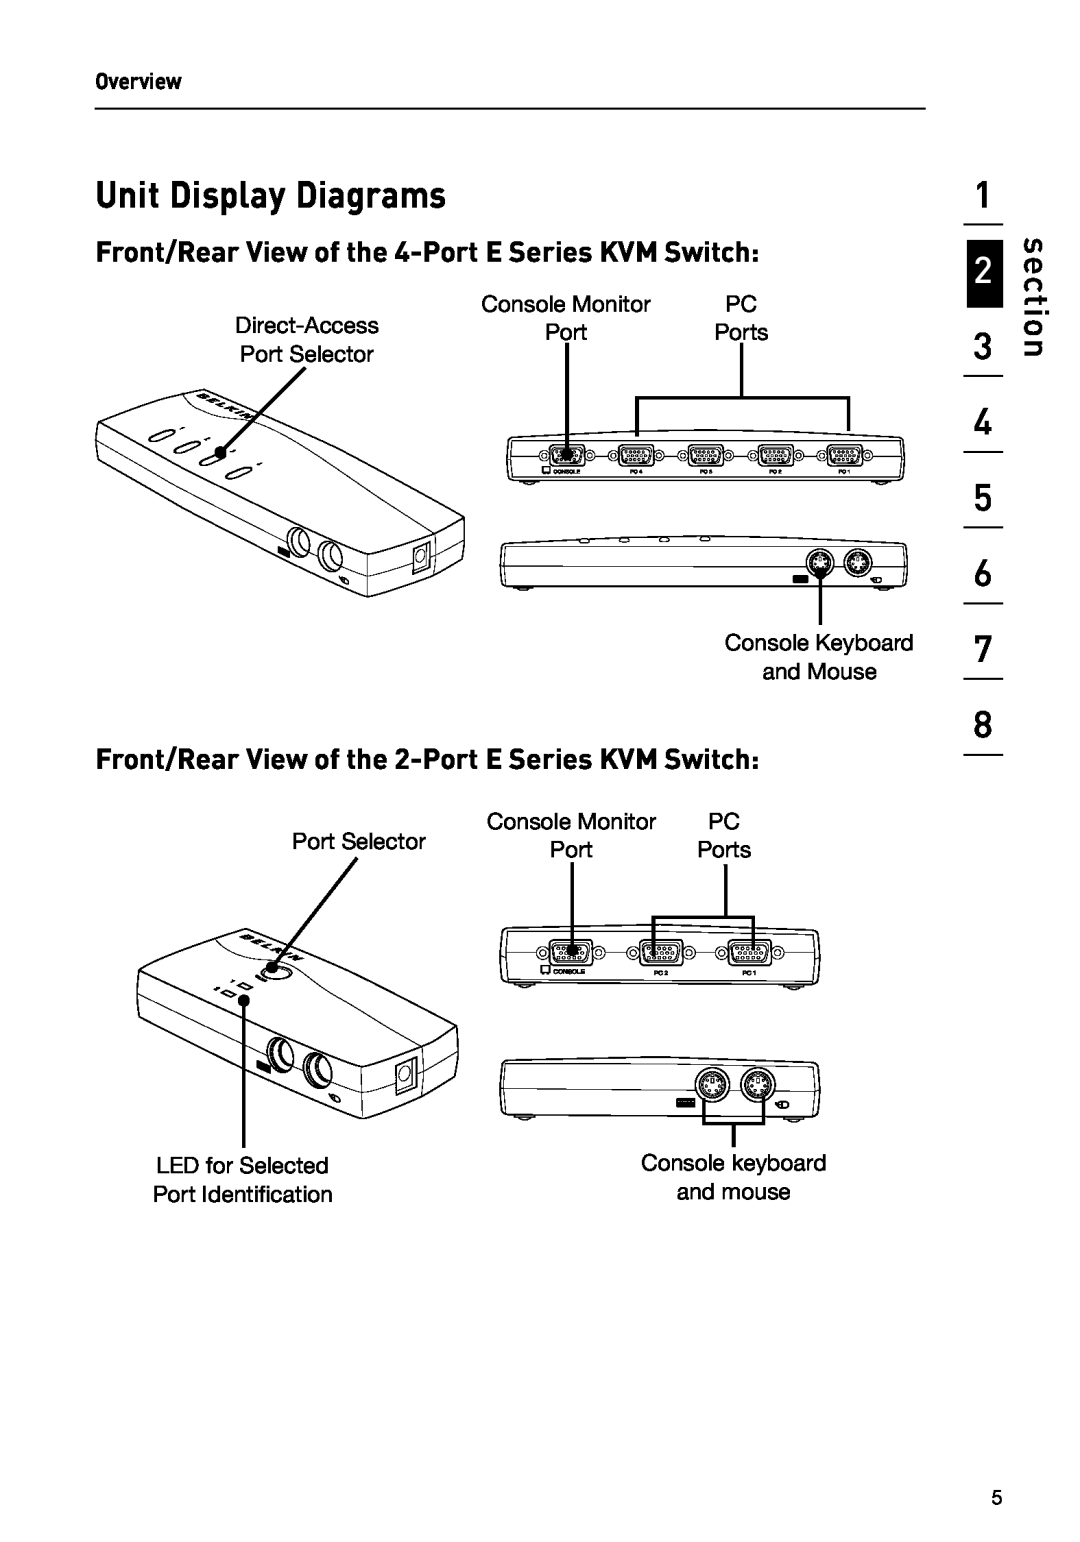 Belkin F1DB102P2 user manual Unit Display Diagrams, Front/Rear View of the 4-Port E Series KVM Switch, section 